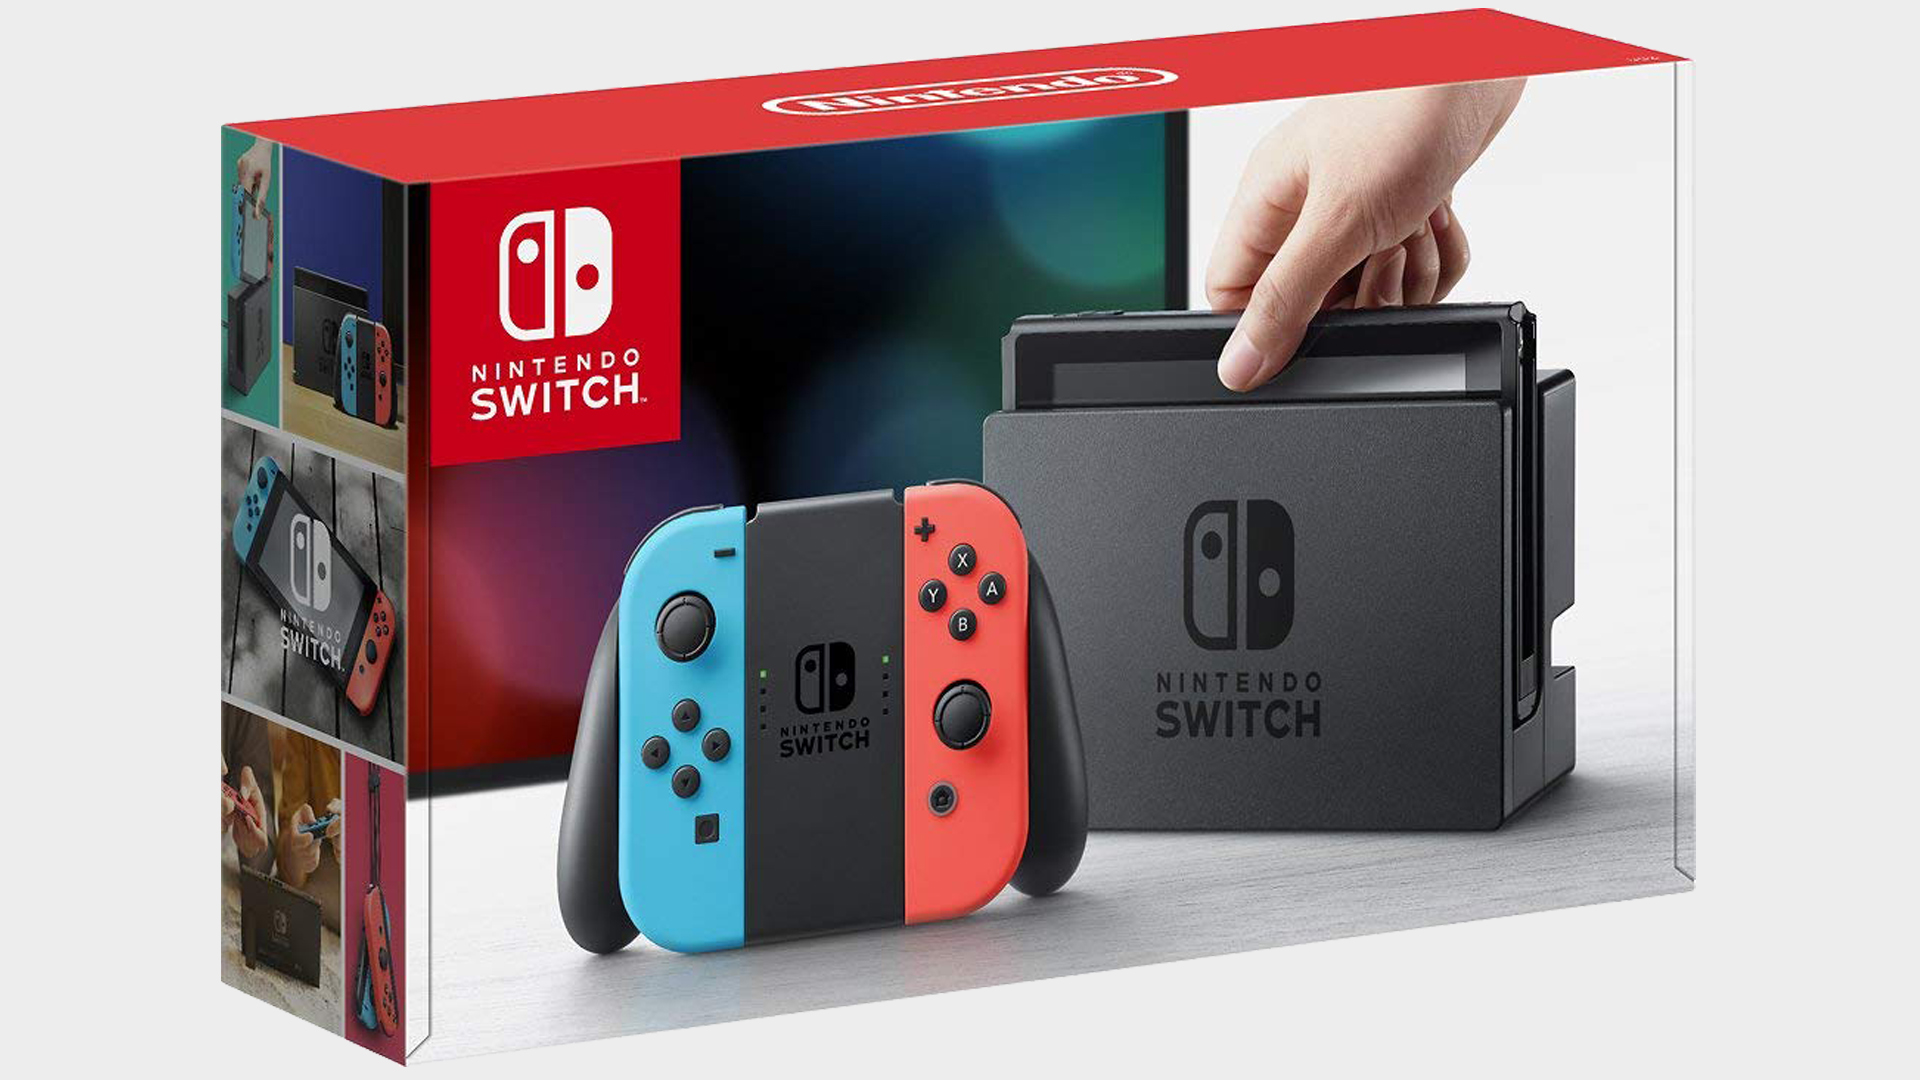 Switch has now outsold PS4 in the US